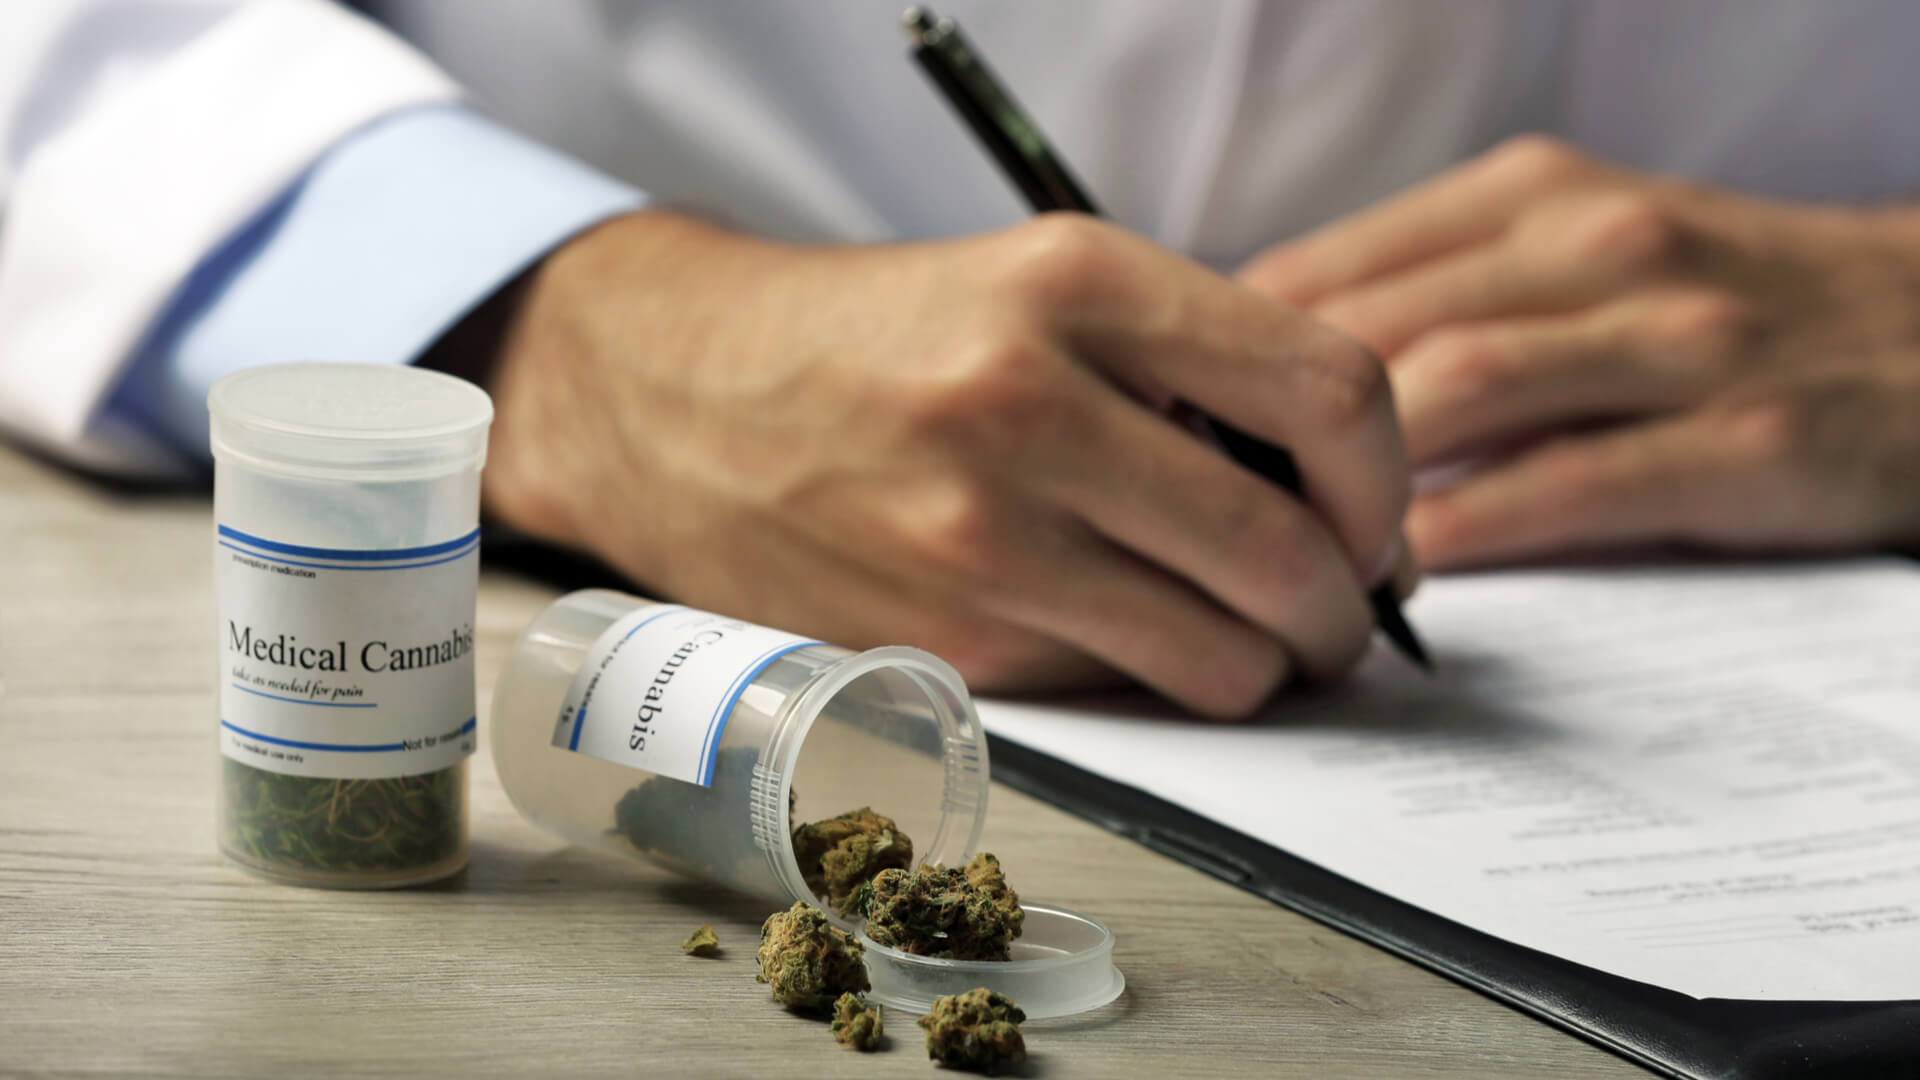 Doctor writing on prescription blank with a bottle of medical cannabis next to him